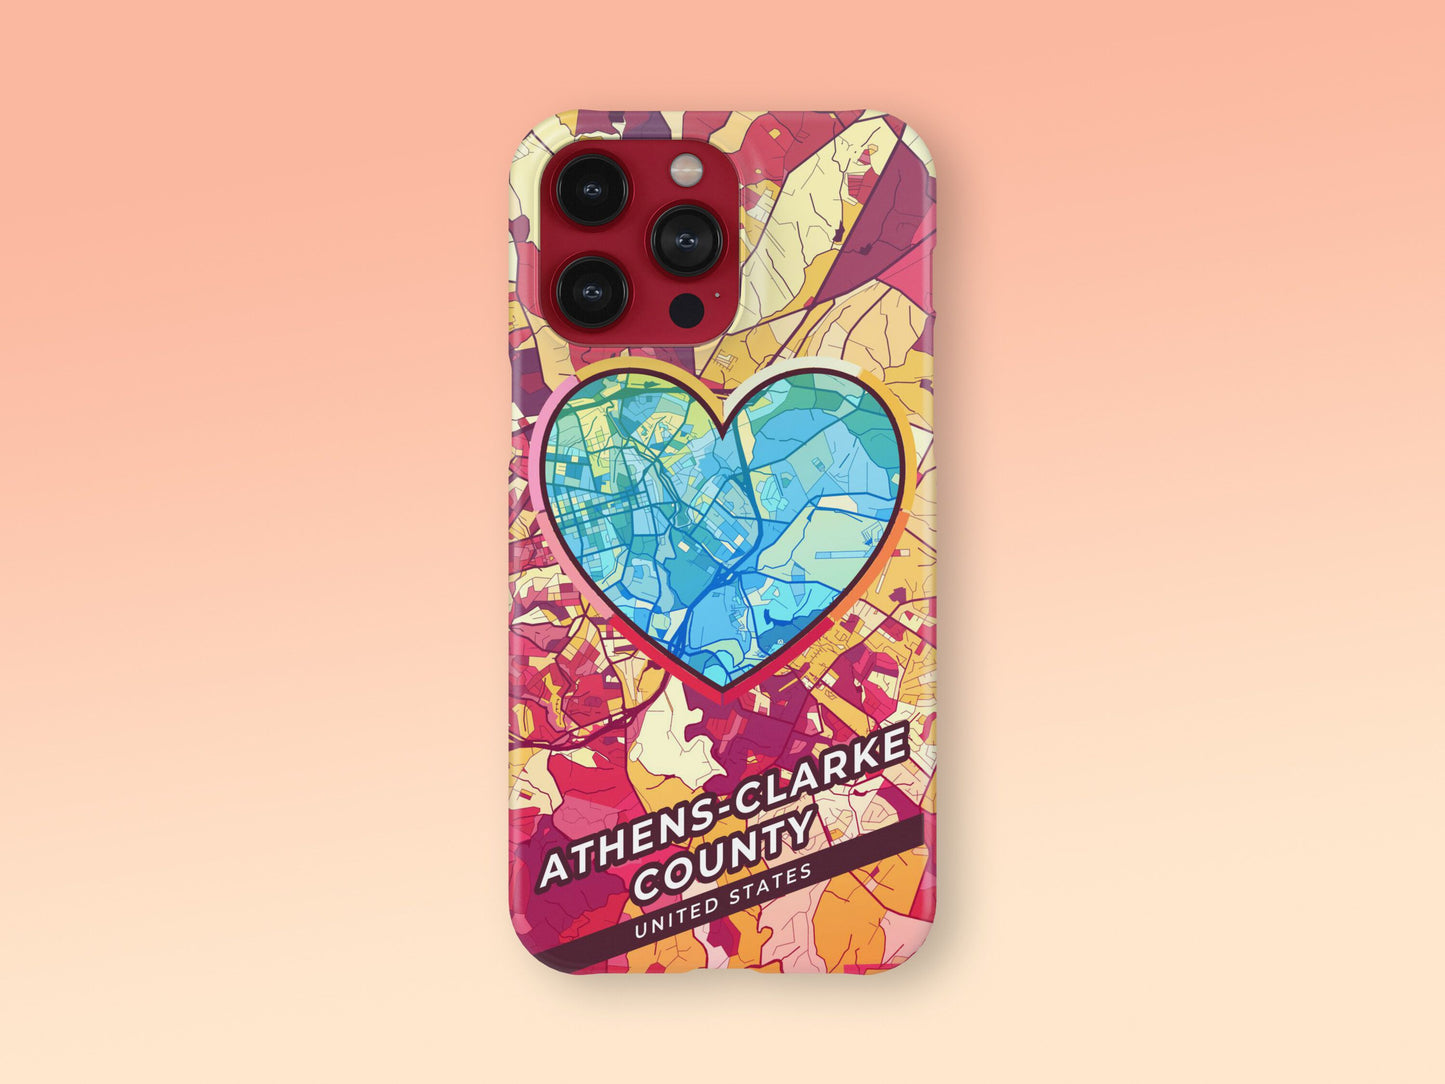 Athens-Clarke County Georgia slim phone case with colorful icon. Birthday, wedding or housewarming gift. Couple match cases. 2